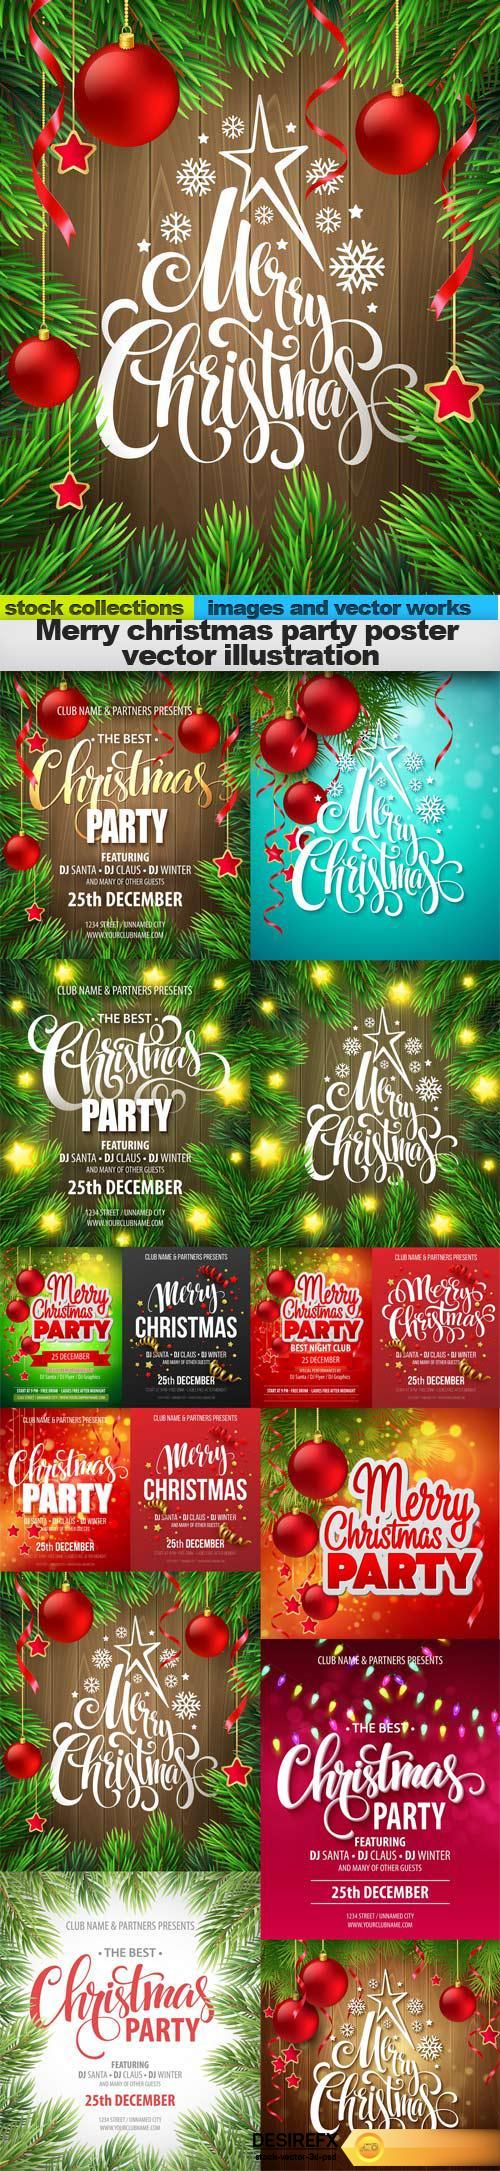 Merry christmas party poster vector illustration, 15 x EPS